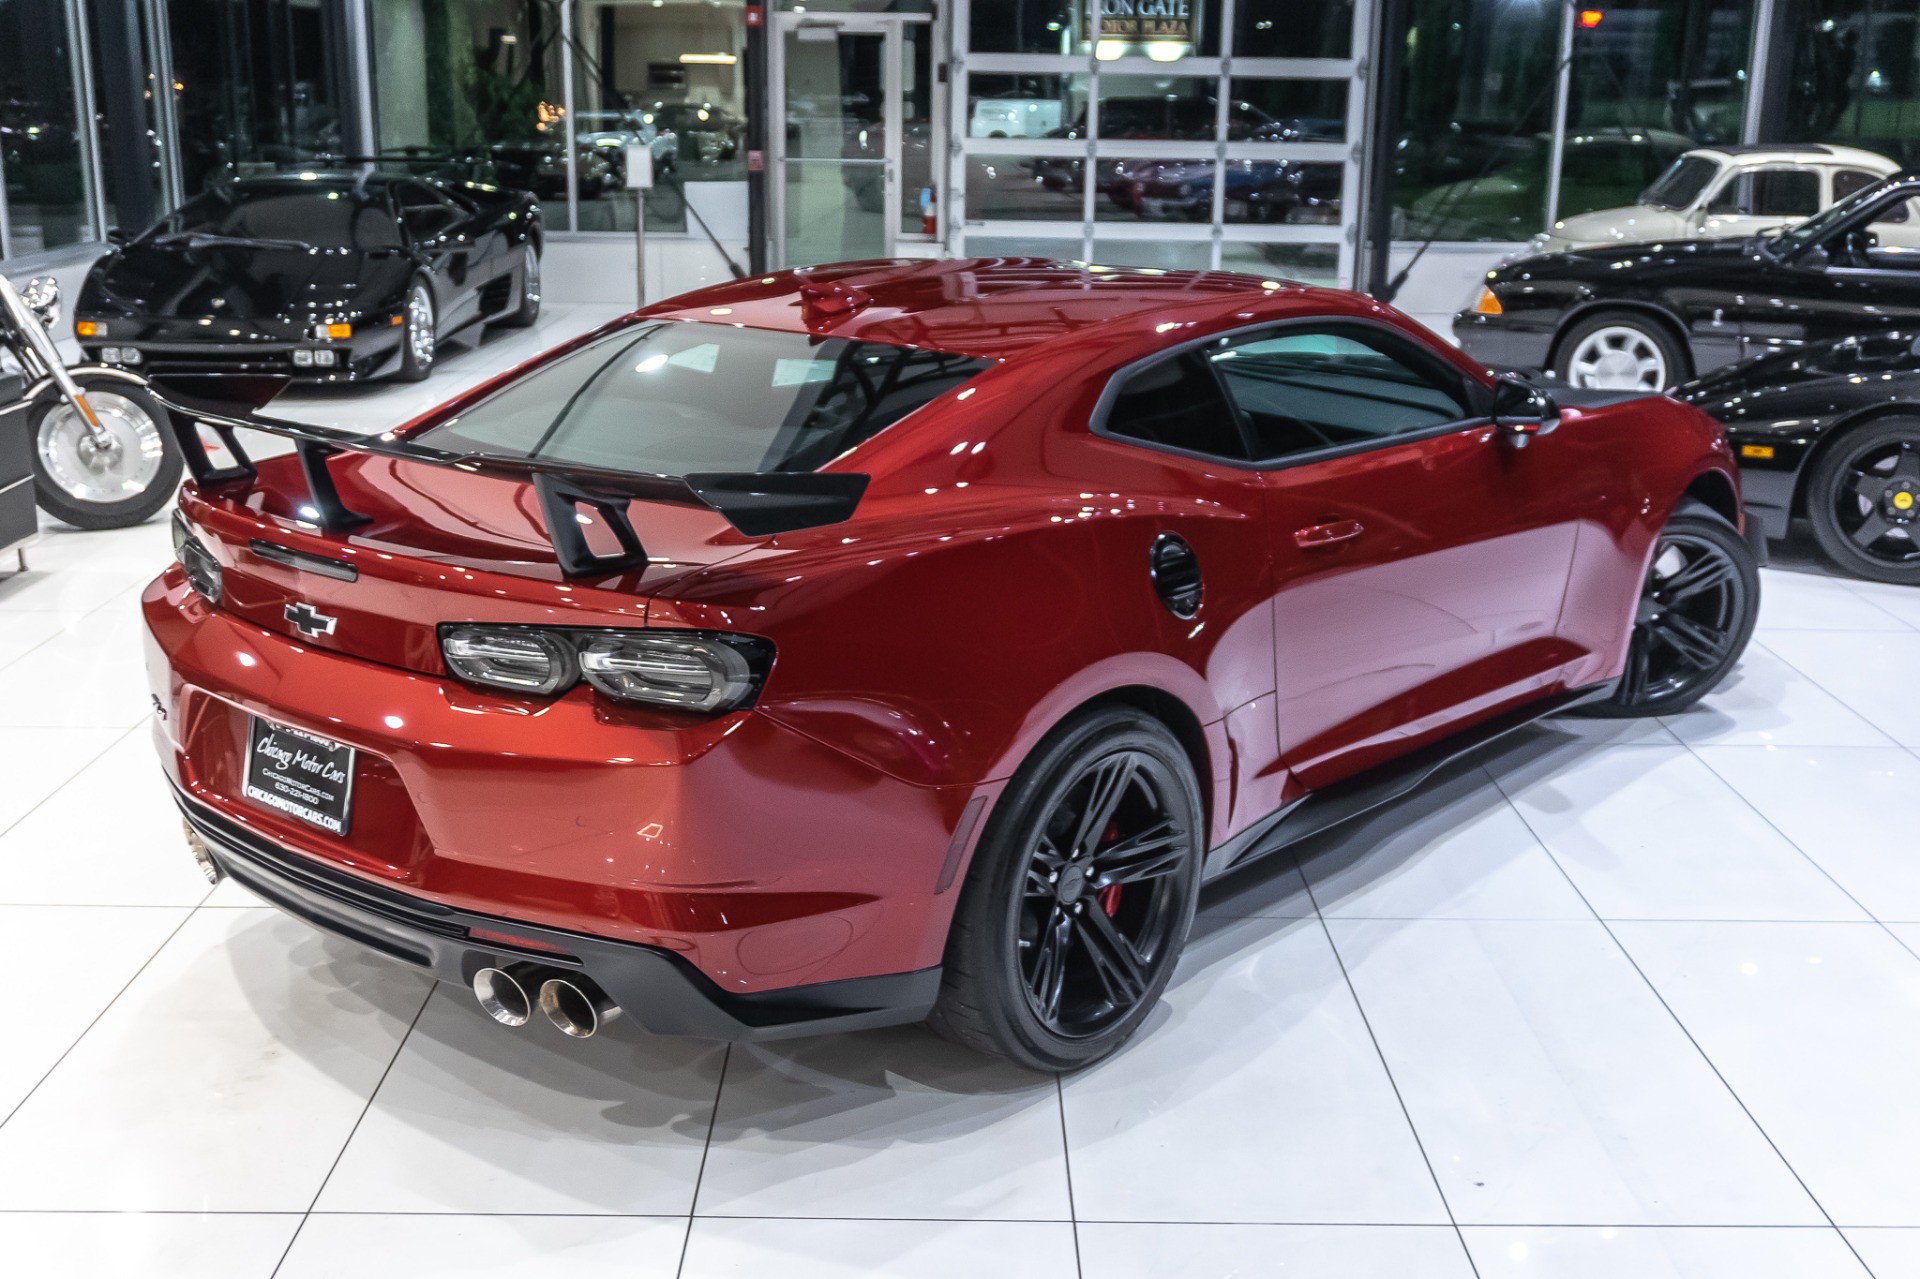 Used 2019 Chevrolet Camaro ZL1 1LE ONLY 161 MILES For Sale 69 800 